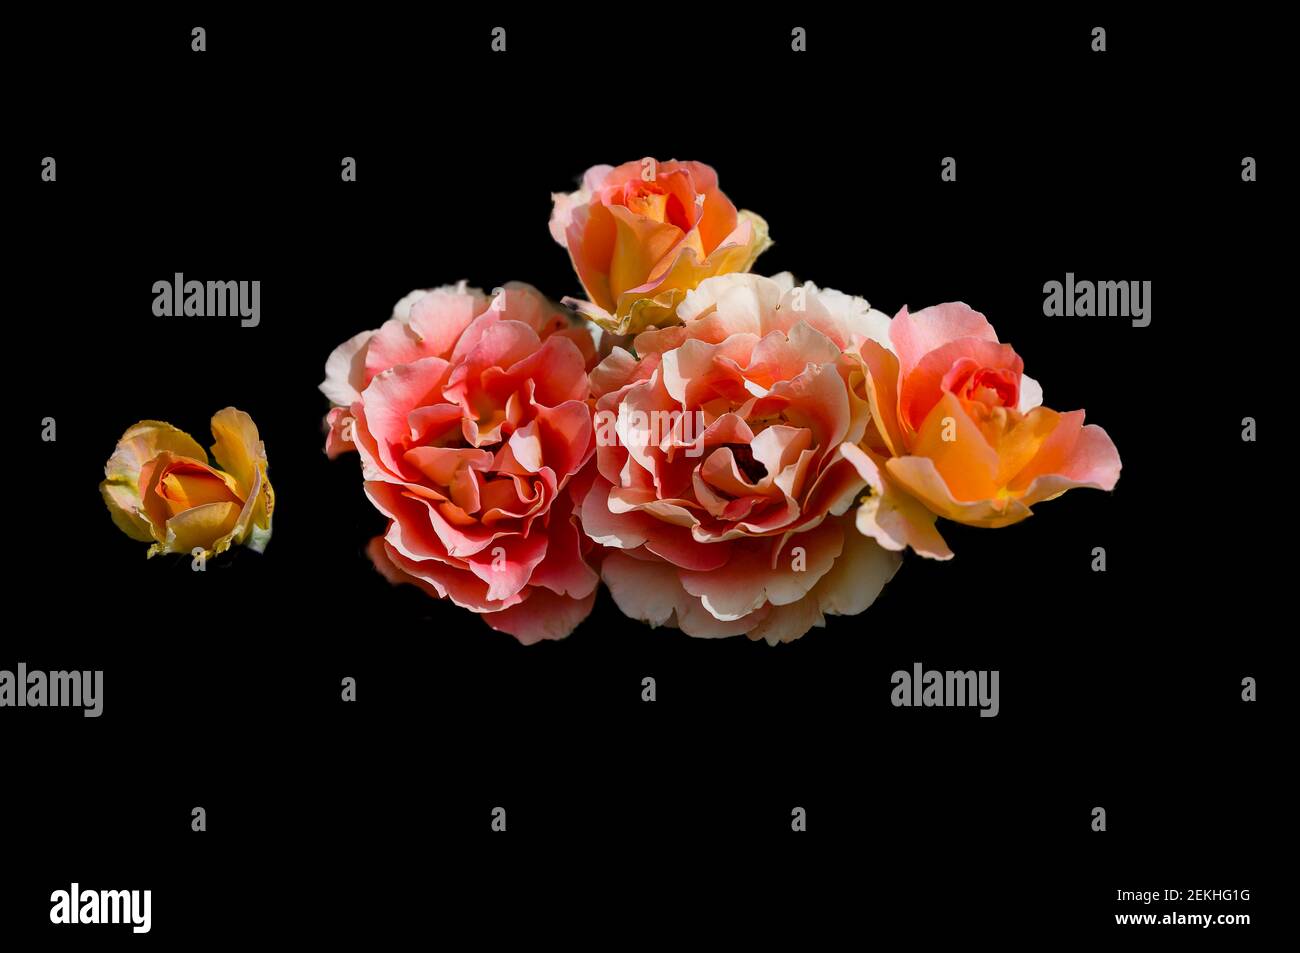 Close-up of rose flowers against black background Stock Photo